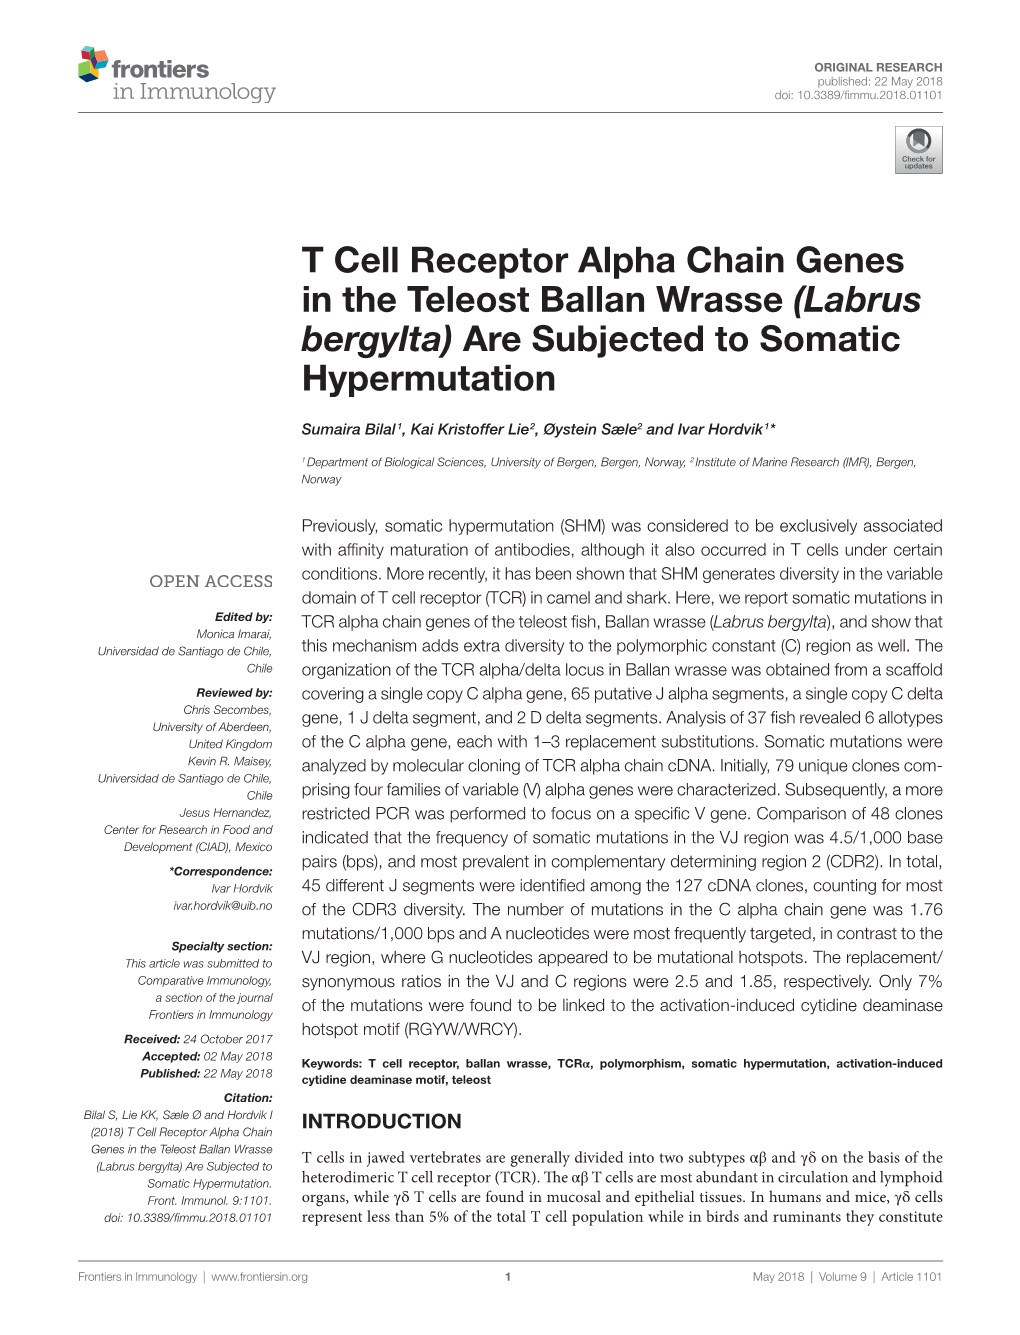 T Cell Receptor Alpha Chain Genes in the Teleost Ballan Wrasse (Labrus Bergylta) Are Subjected to Somatic Hypermutation